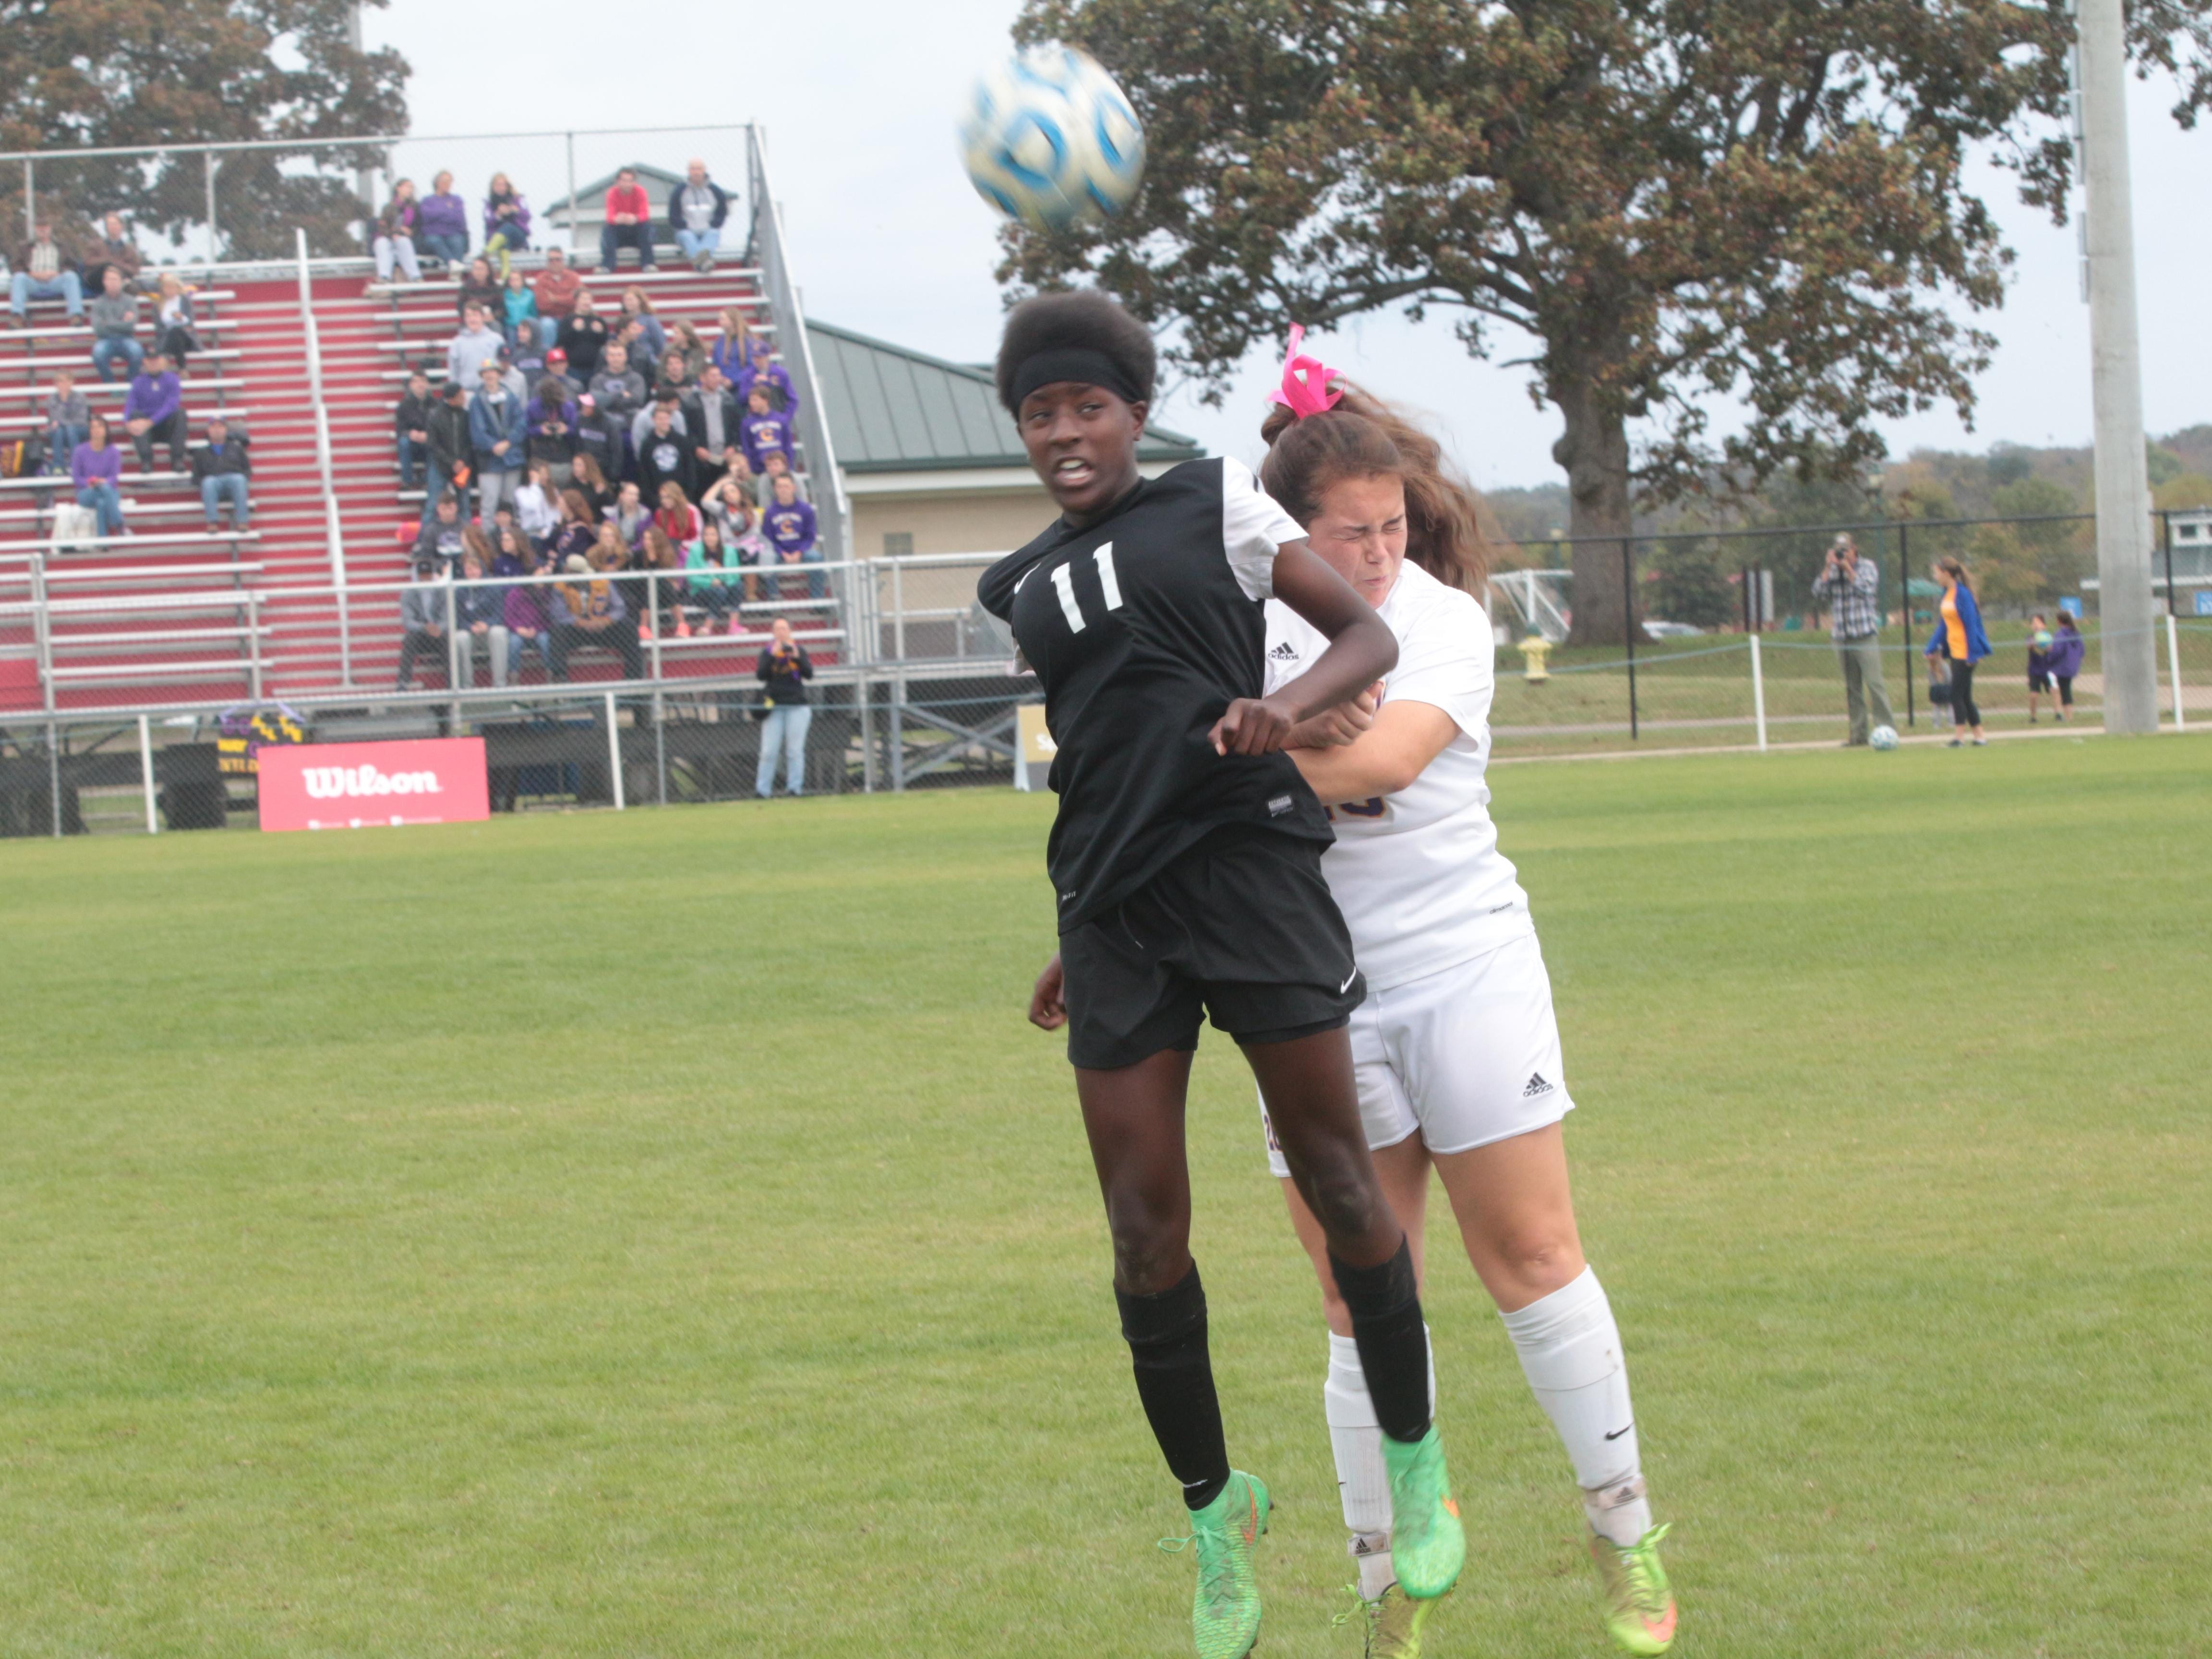 Houston’s Paola Ellis (11) heads the ball away from Clarksville’s Staci Navarro in the first half of Saturday’s game.